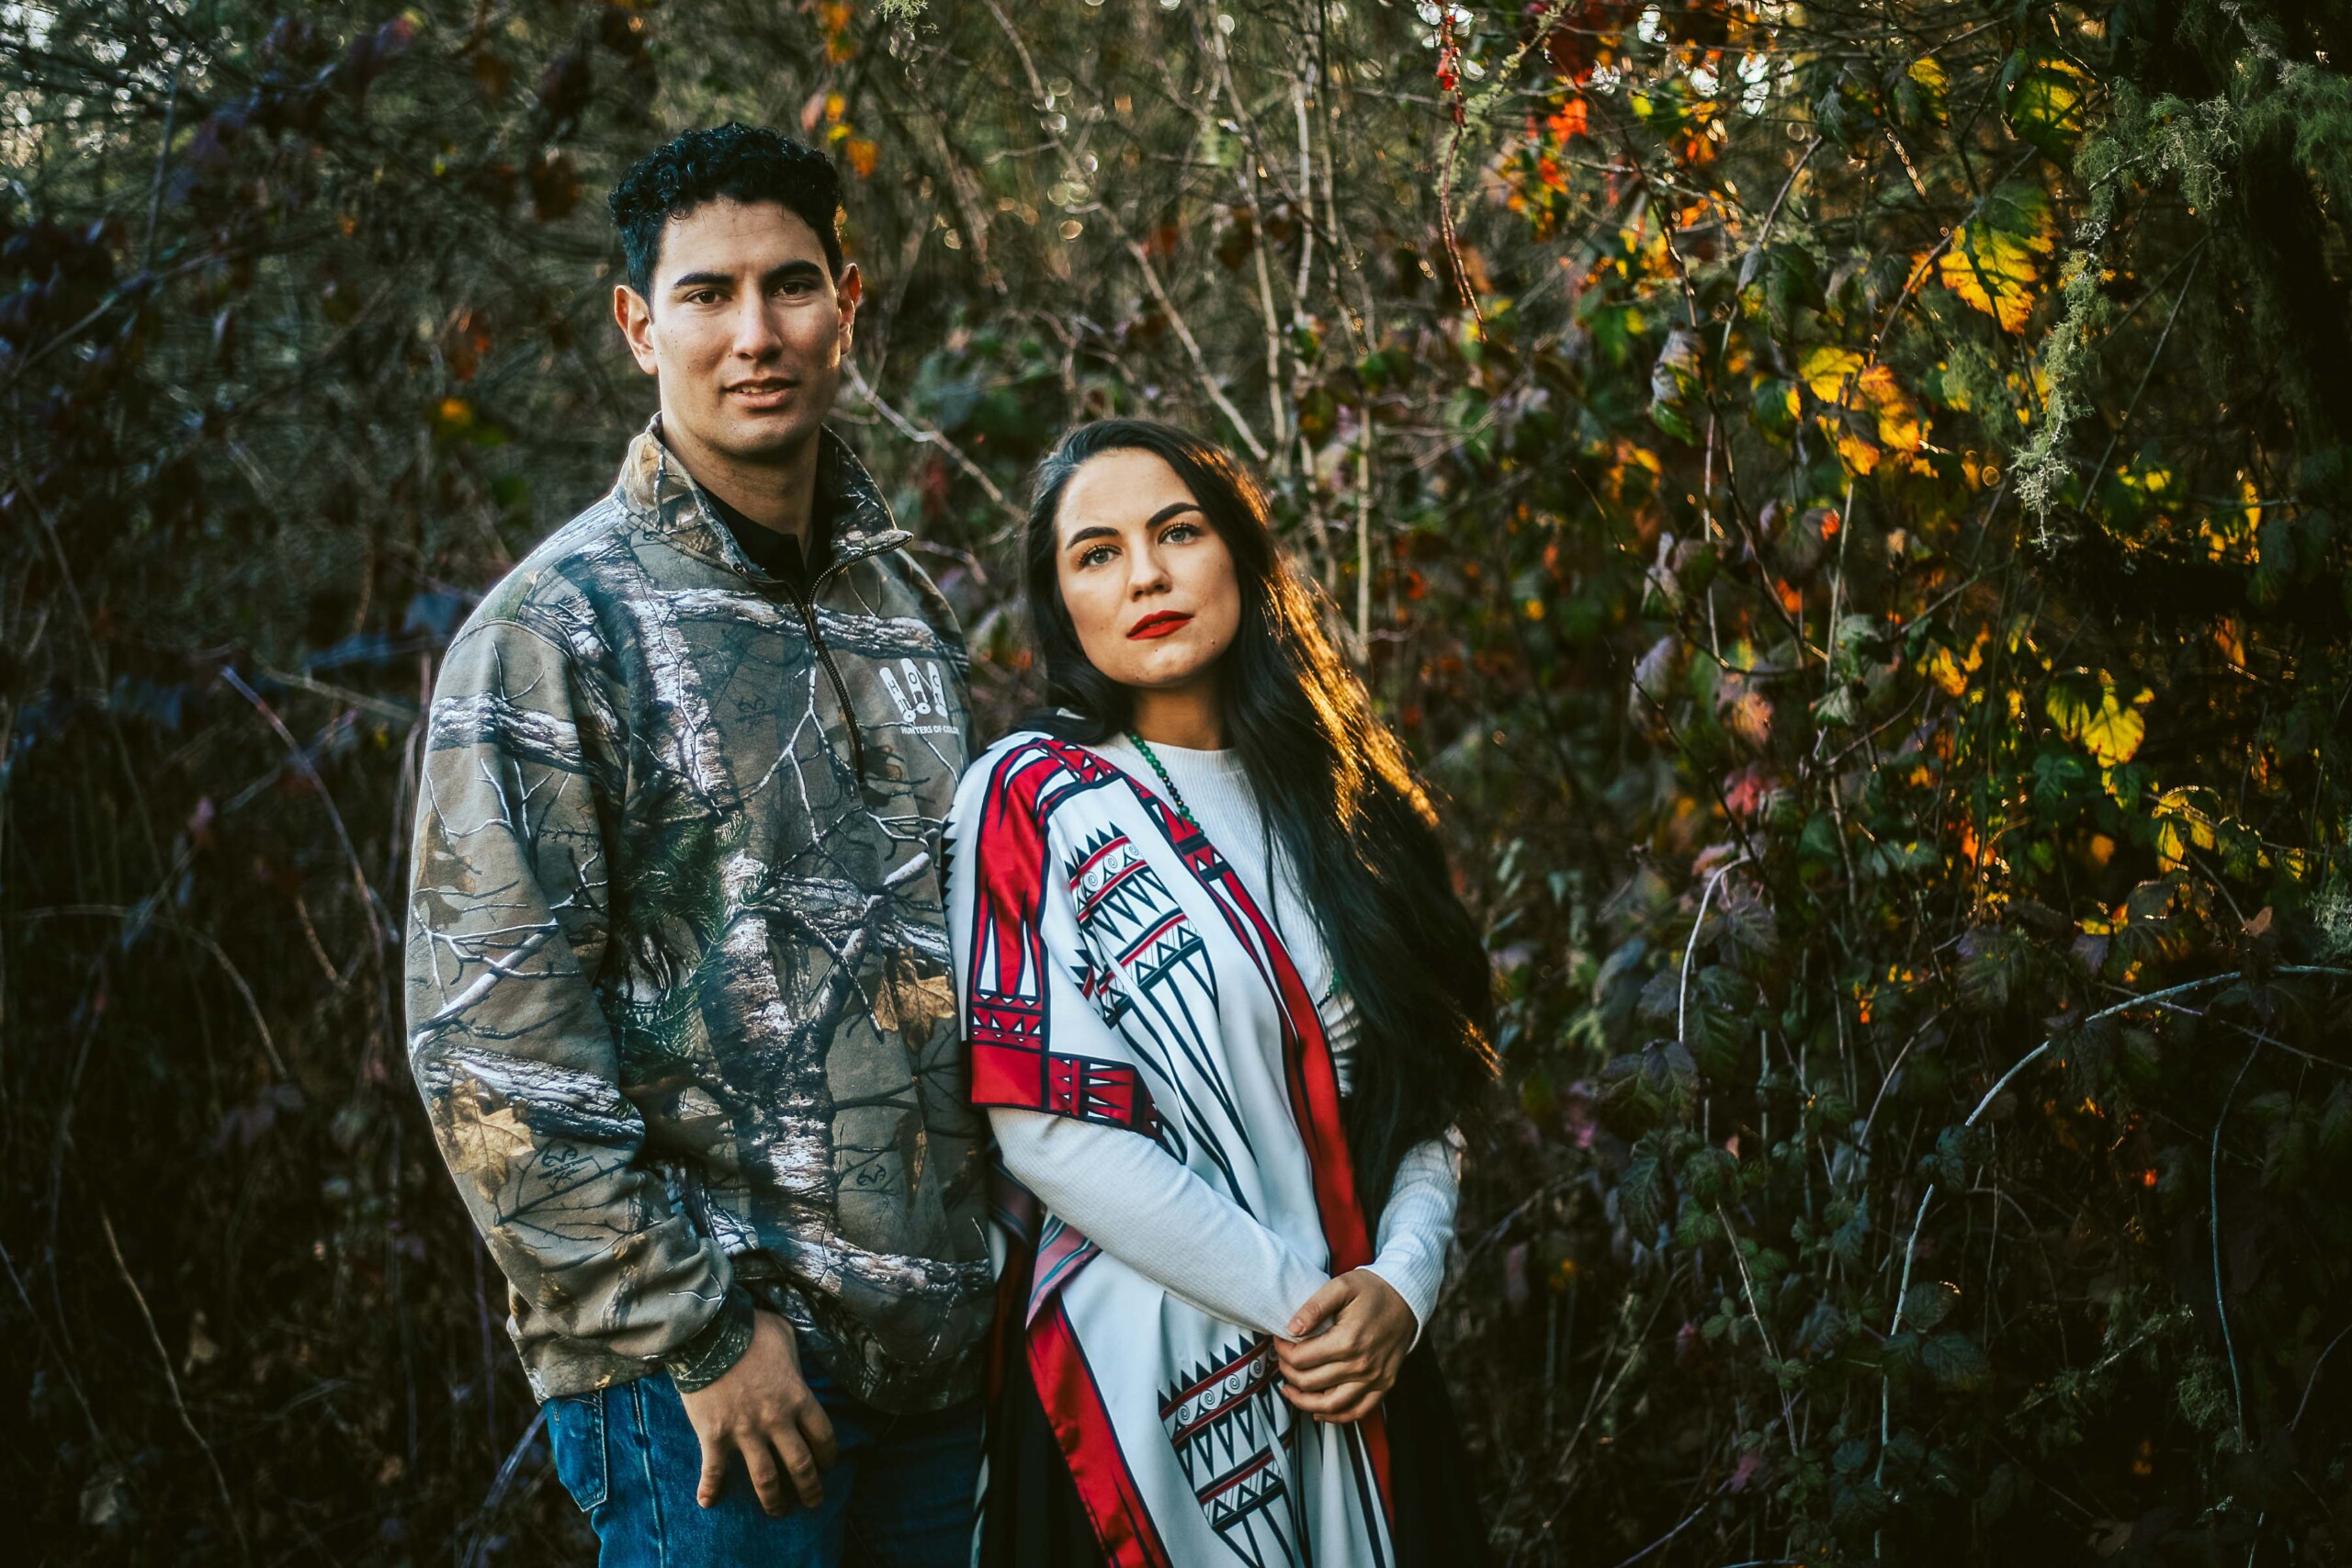 Jimmy Flatt and Lydia Parker, co-founders of Hunters of Color
